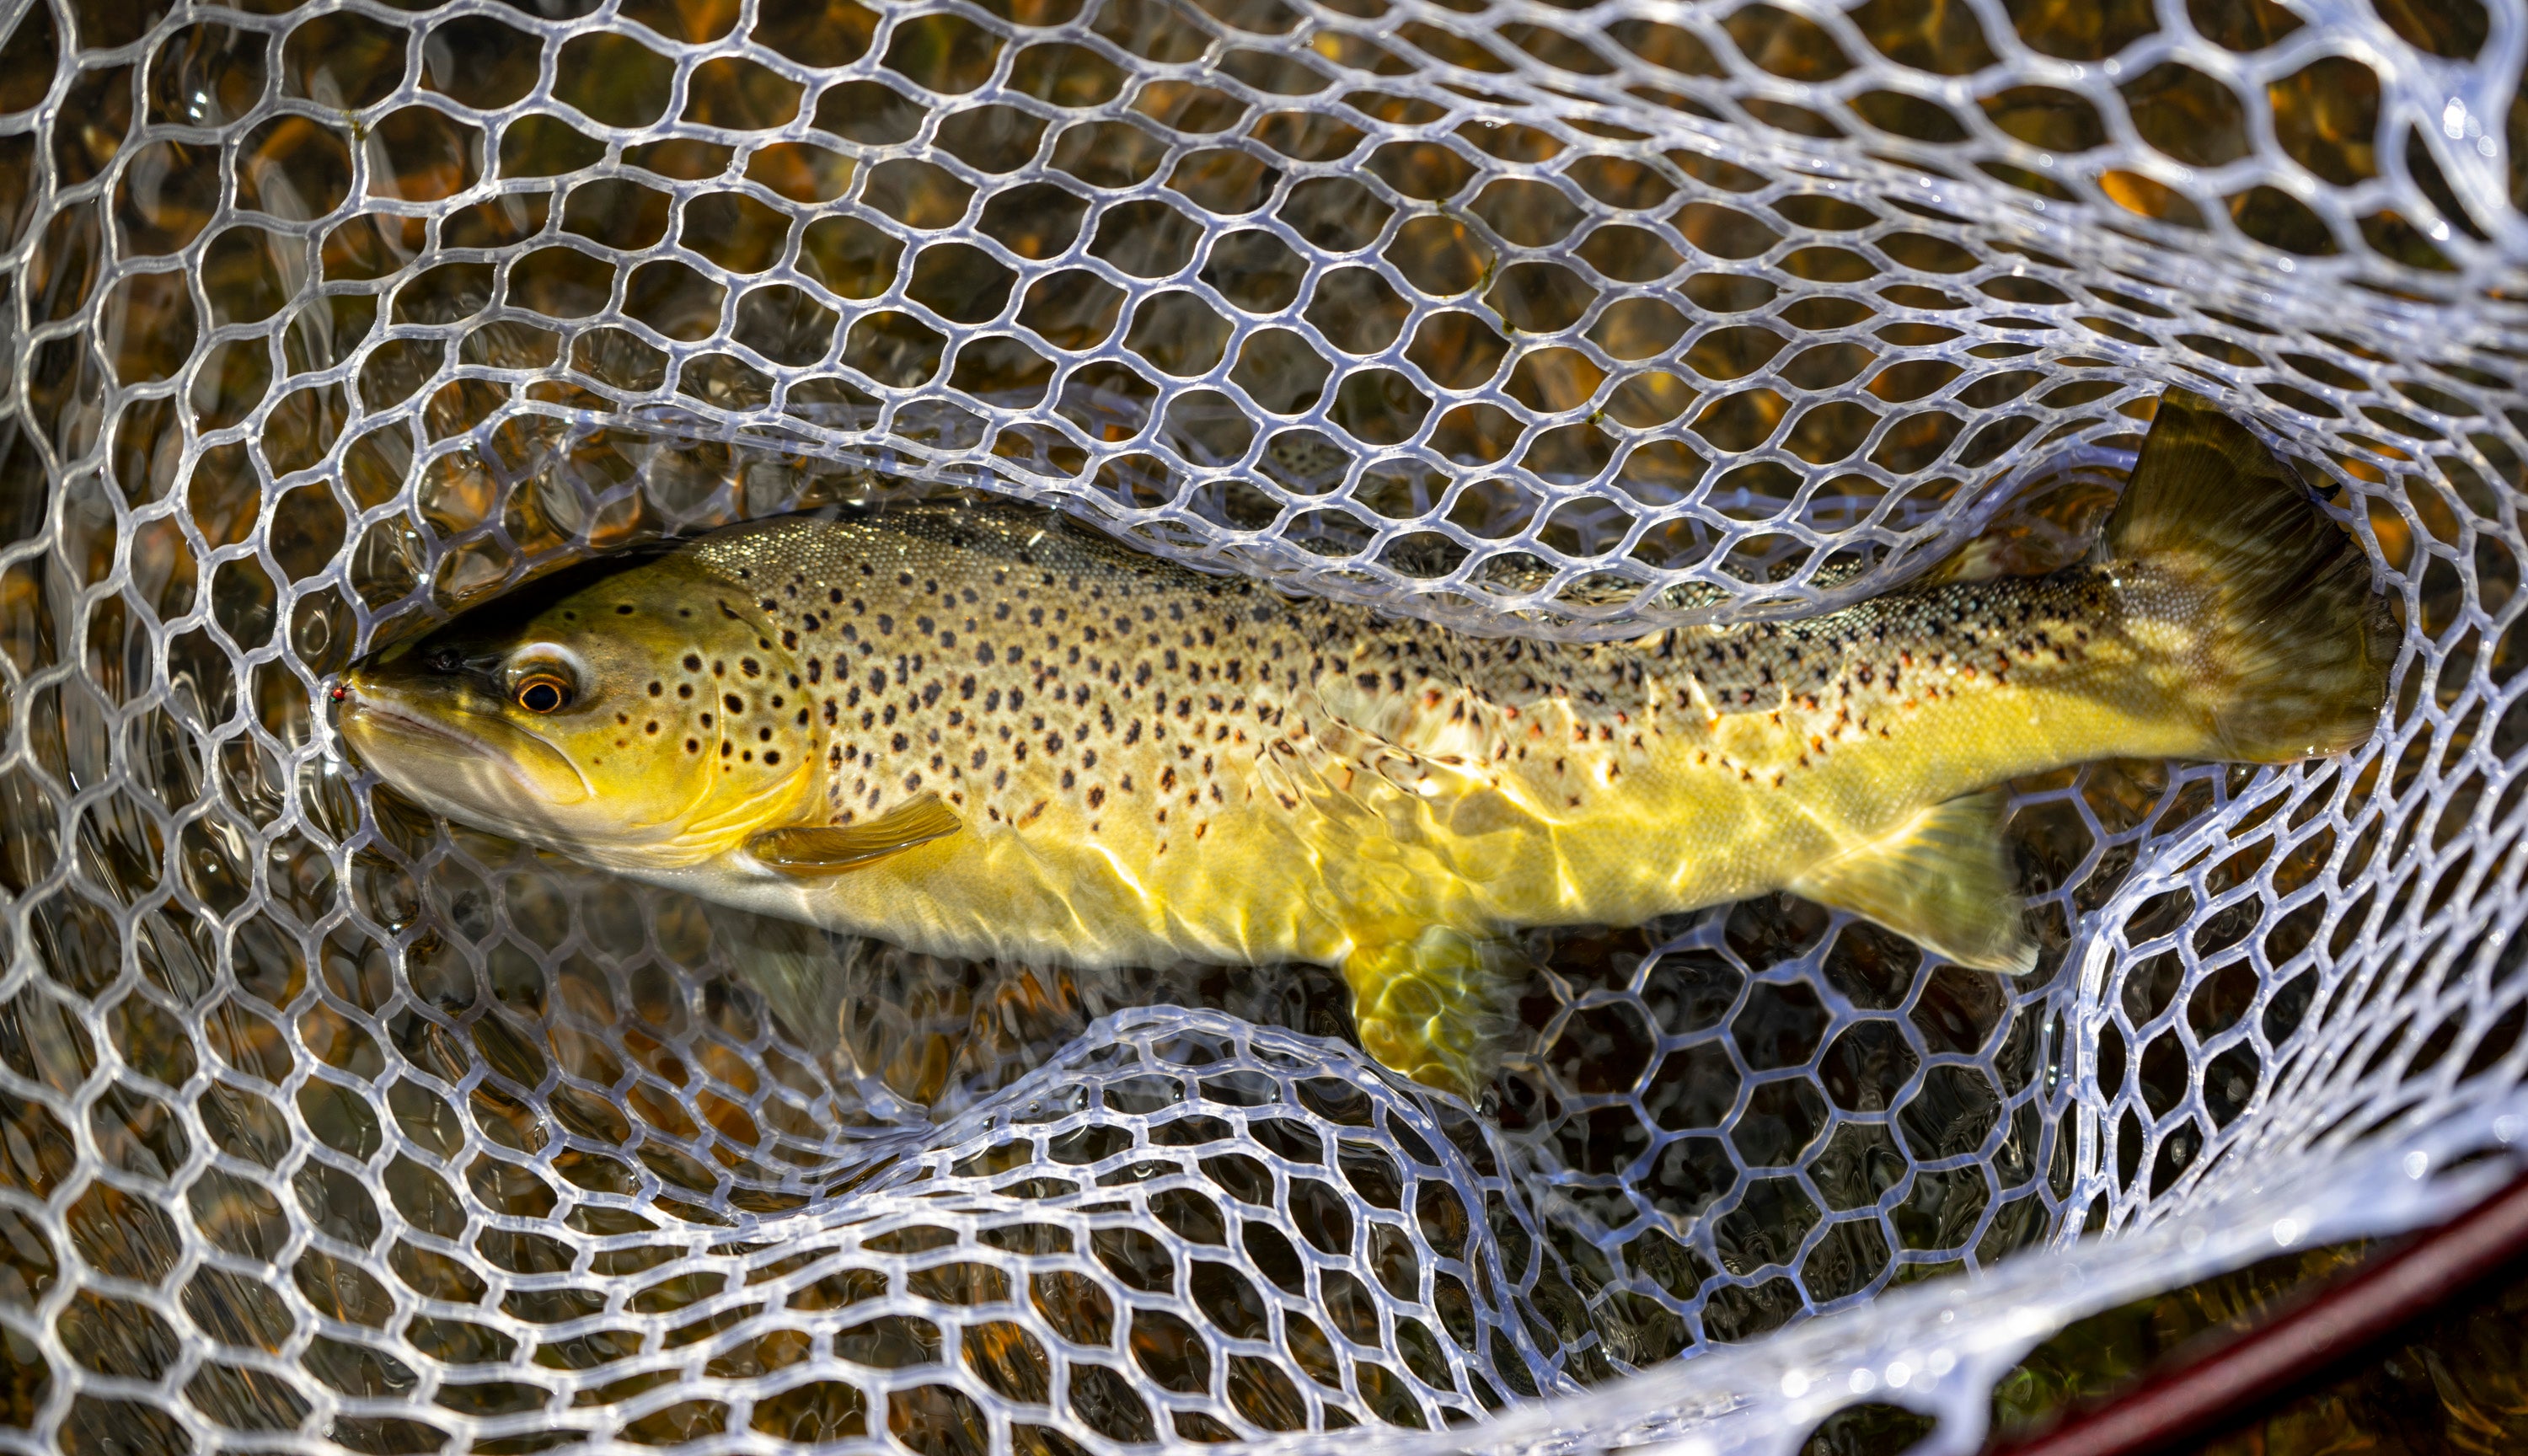 3 Reasons Why November is an Awesome Time to Chase Trout